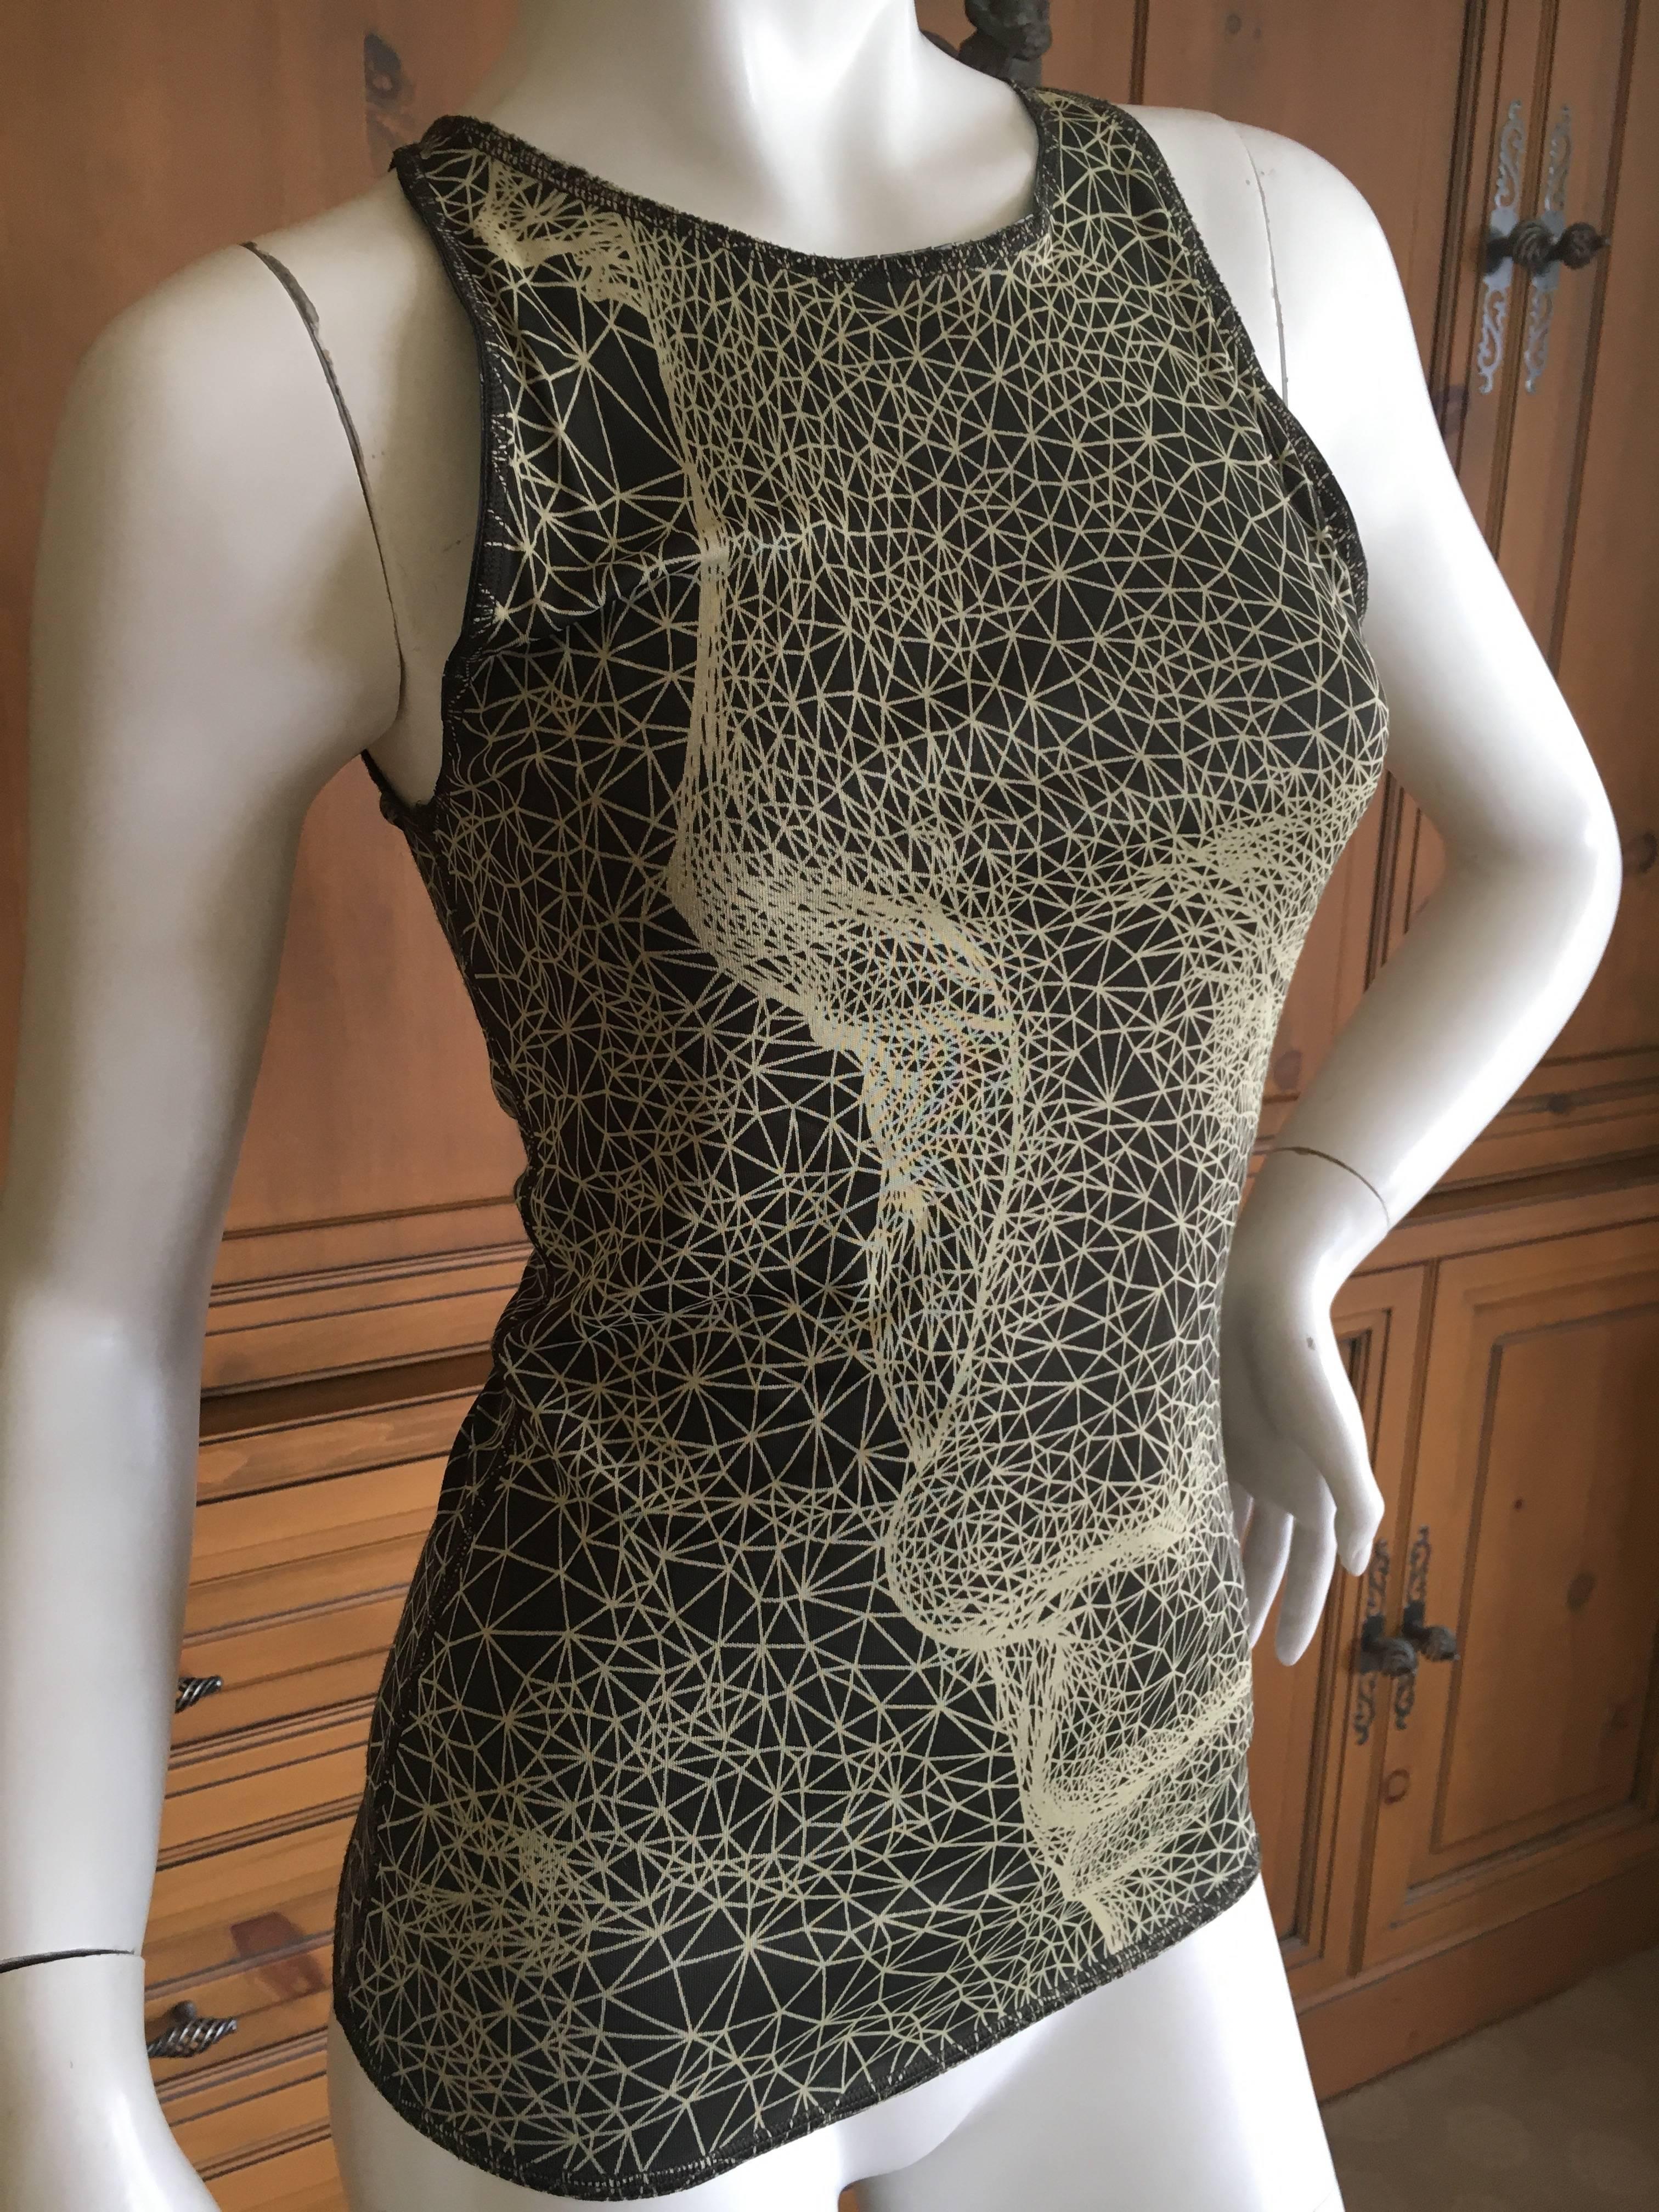 Jean Paul Gaultier Femme Face Print Tank Top.
Size 36 French
US 6